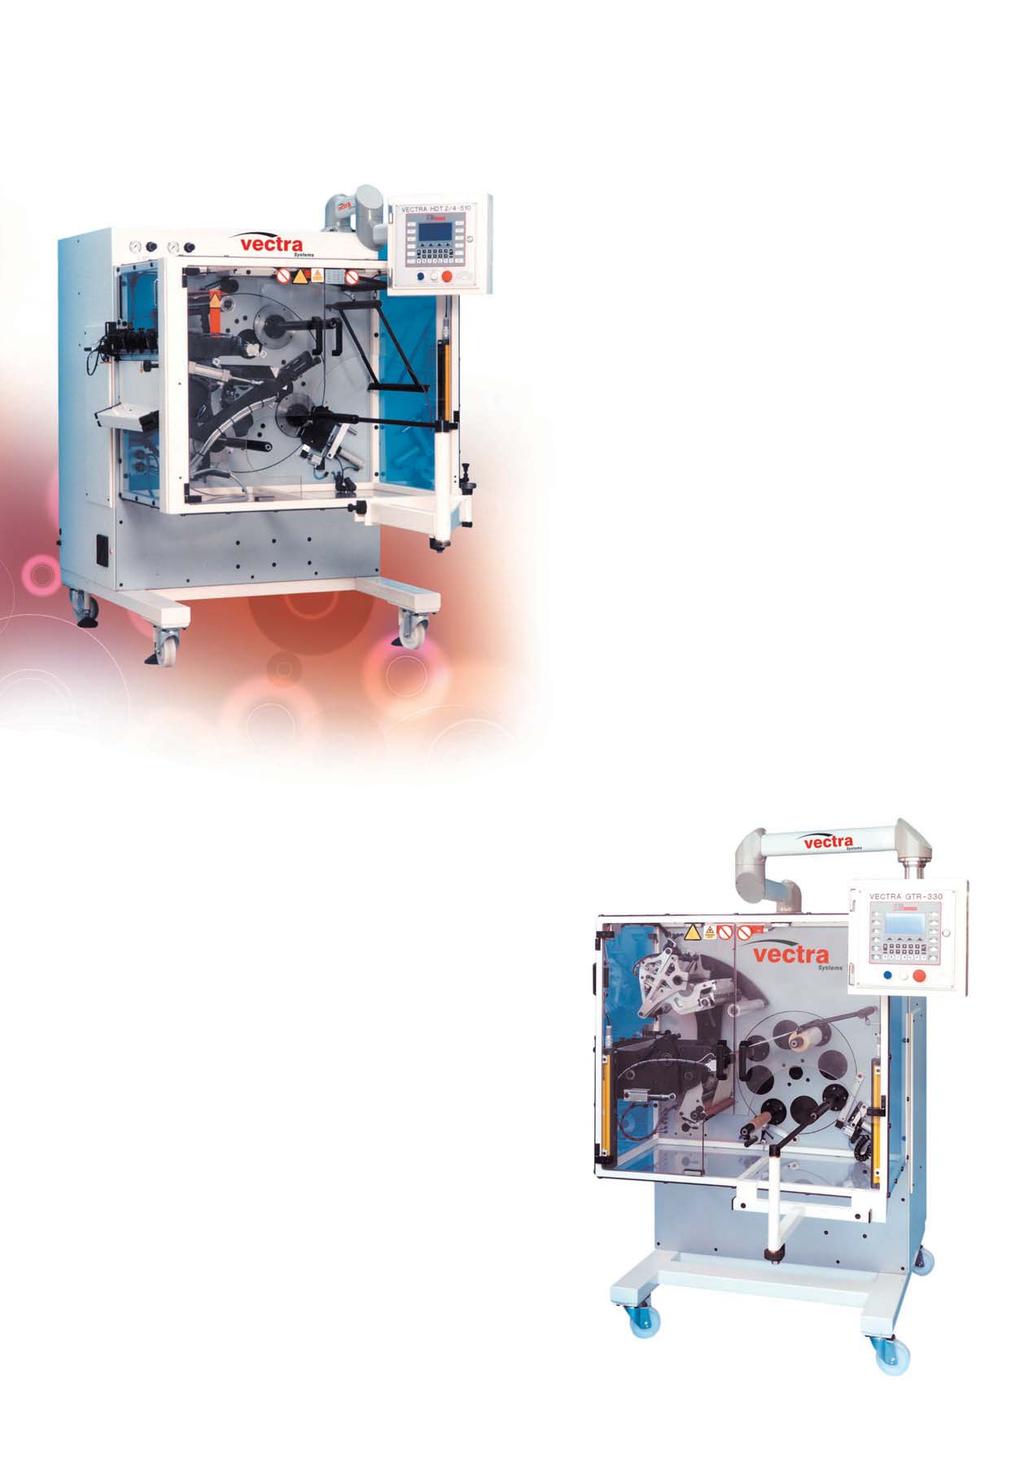 HDTR 330, 410, 510, HD4 2 or 4 spindle turret rewinder for heavy duty / large diameter rewinding The 4 spindle heavy duty Vectra turret rewinder is a semi-automatic machine intended for continuous